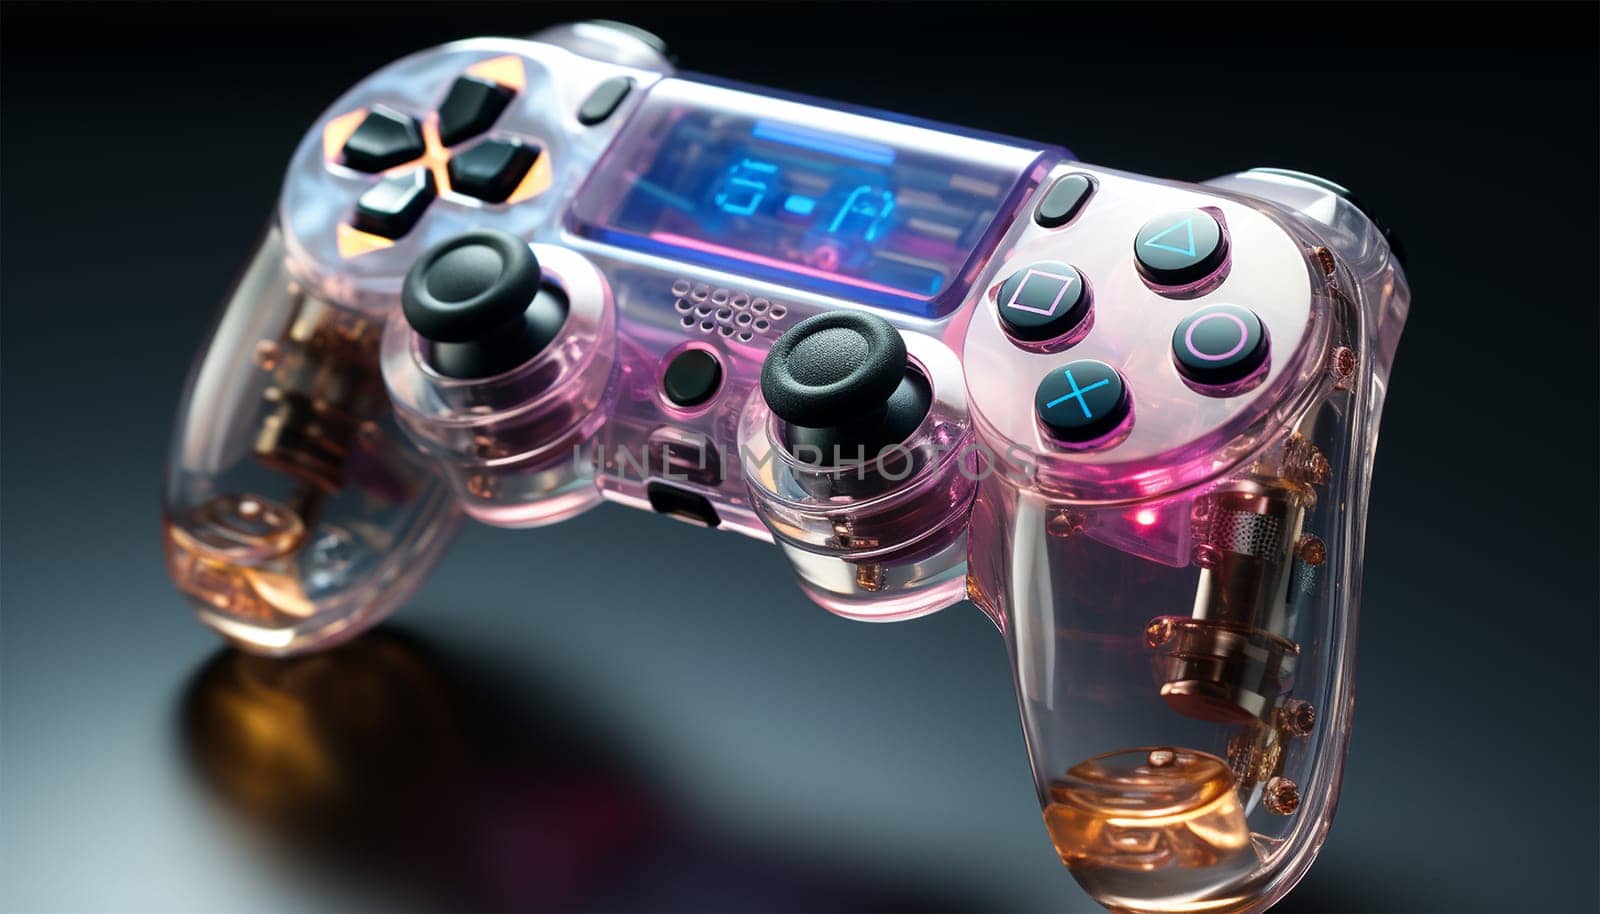 Neon game consol transparent. Purple,blue,pink glowing console controller or joystick with a cool neon background with space theme. best for retro gaming posters or promotional content for gaming tournaments etc. Colorful space themed cover. Copy space space for text